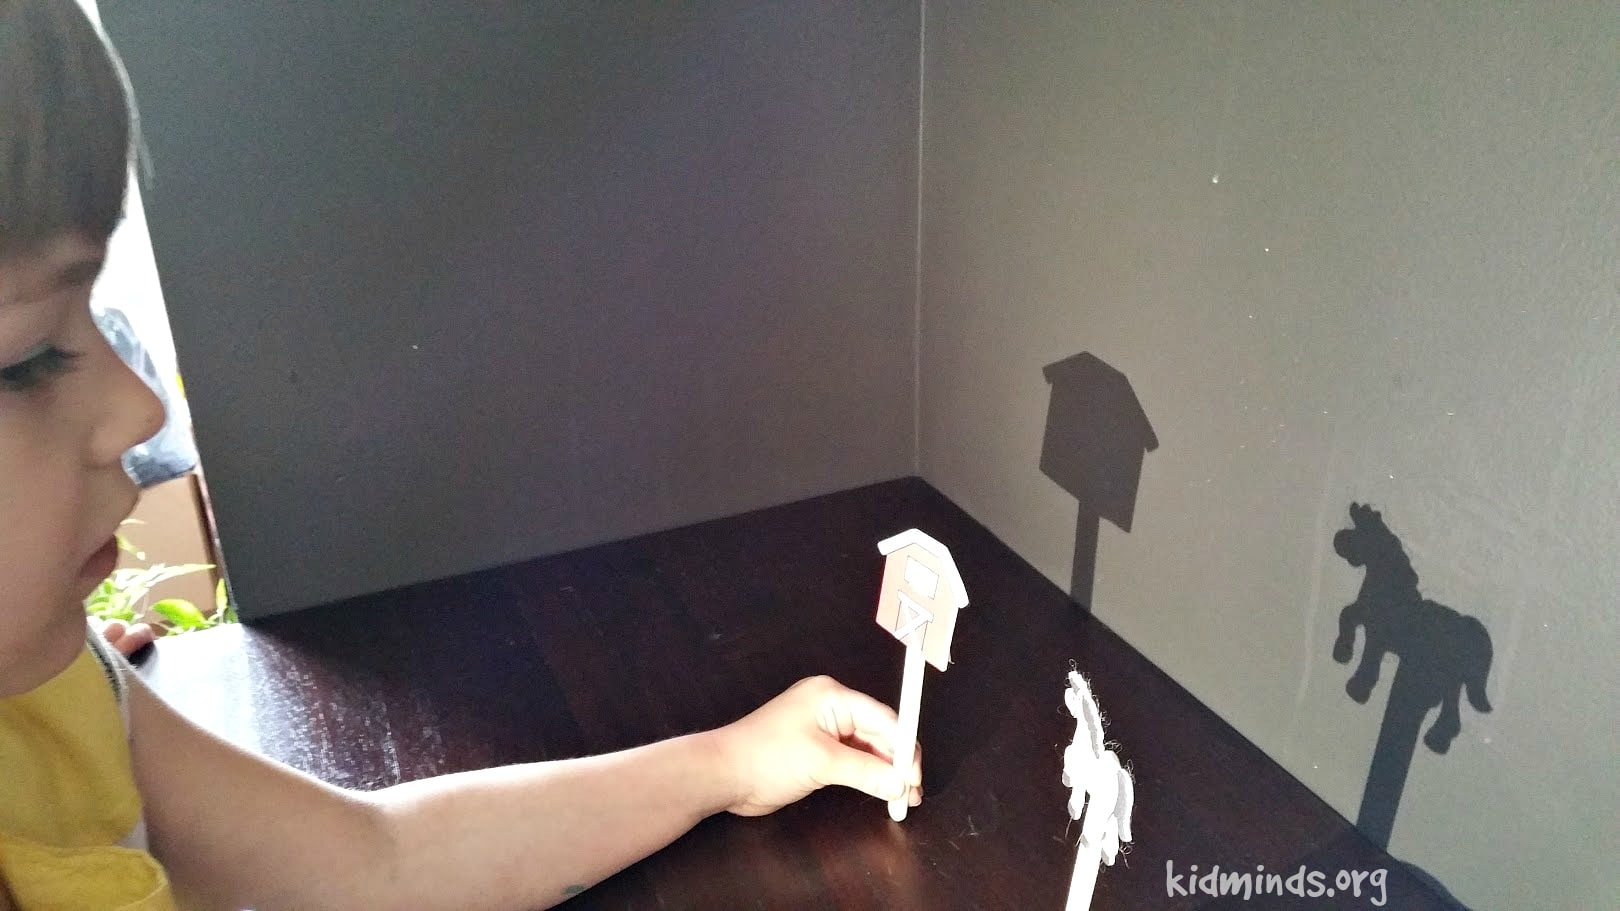 The Science of Shadows is a fun unit study for kids 4-9 that is perfect for a science camp at home!   Experiment with shadows, learn what is shadow, where it comes from and how it moves. 